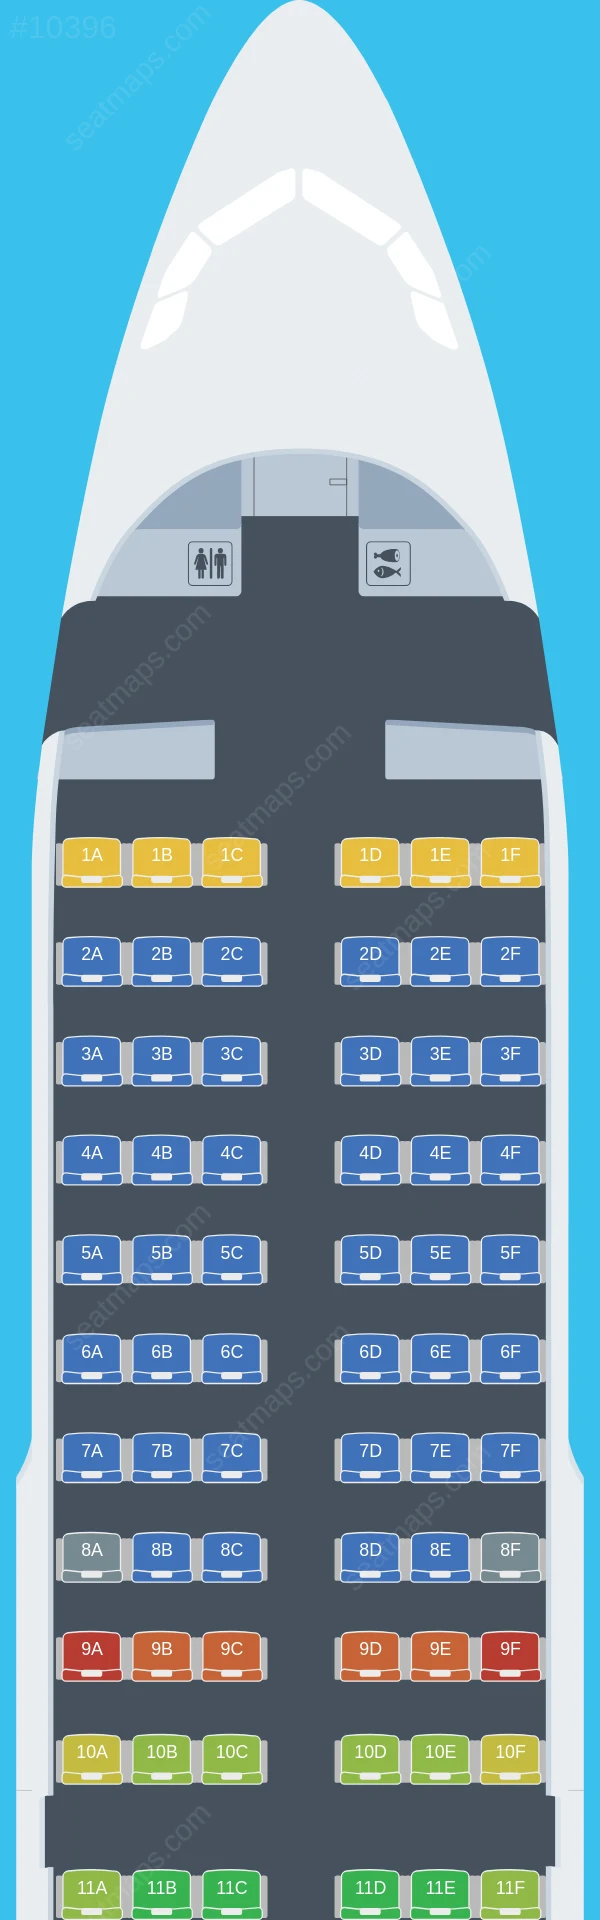 Royal Air Charter Service Airbus A319-100 seatmap preview